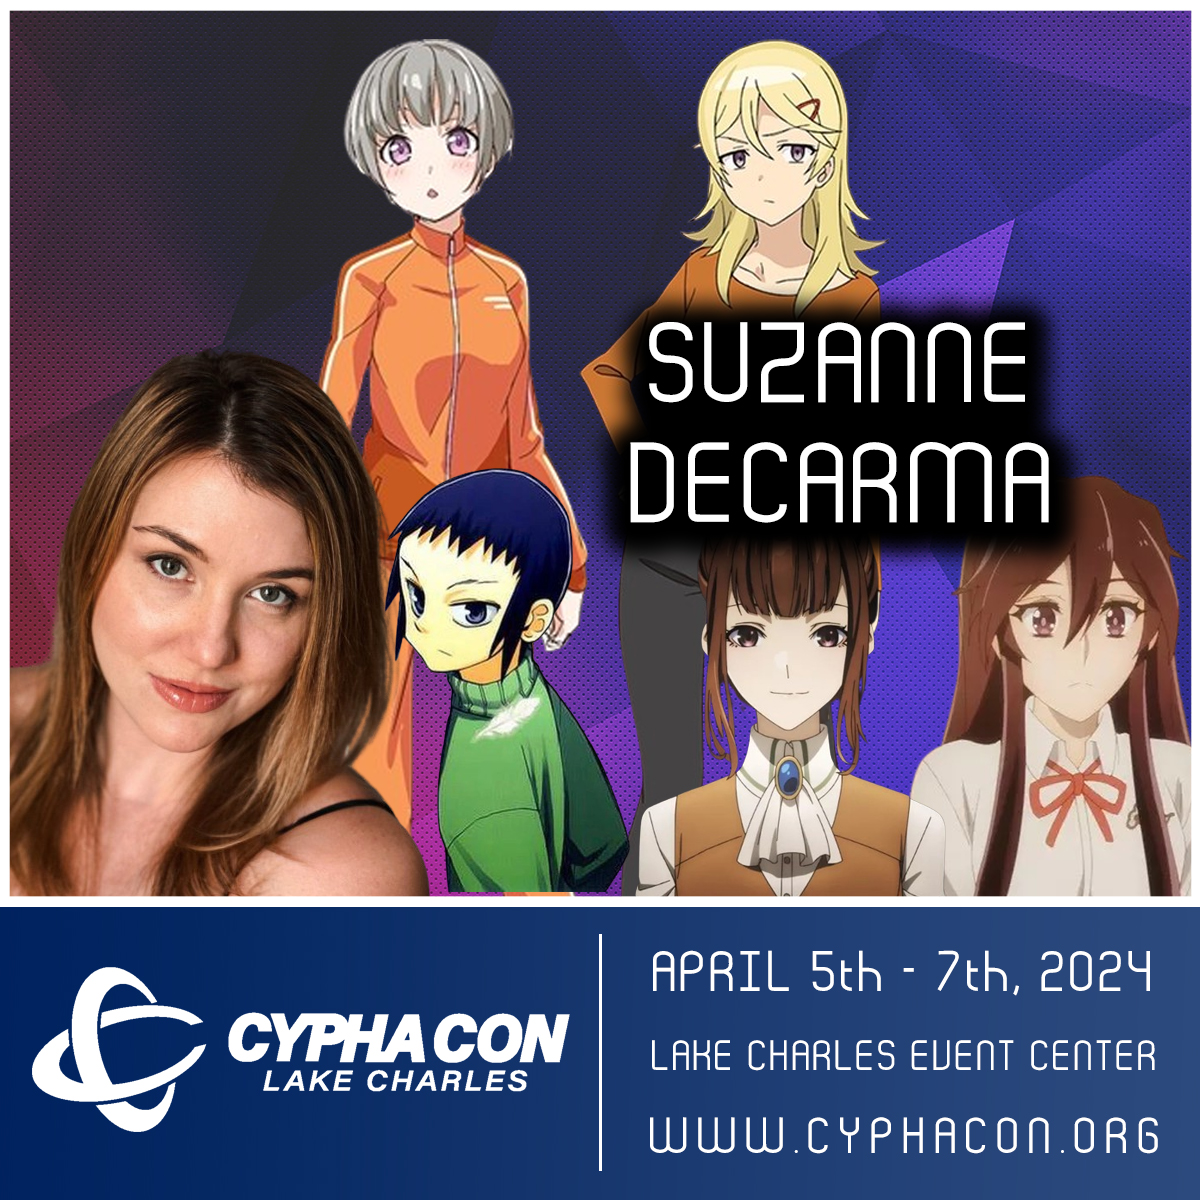 CYPHACON is pleased to announce our next Special Guest, SuzAnne DeCarma! SuzAnne will be joining us April 5th - 7th, 2024 at the @LCCivicCenter in Lake Charles Louisiana! For complete information visit our website, tickets on sale now! cyphacon.org/speakers/featu…